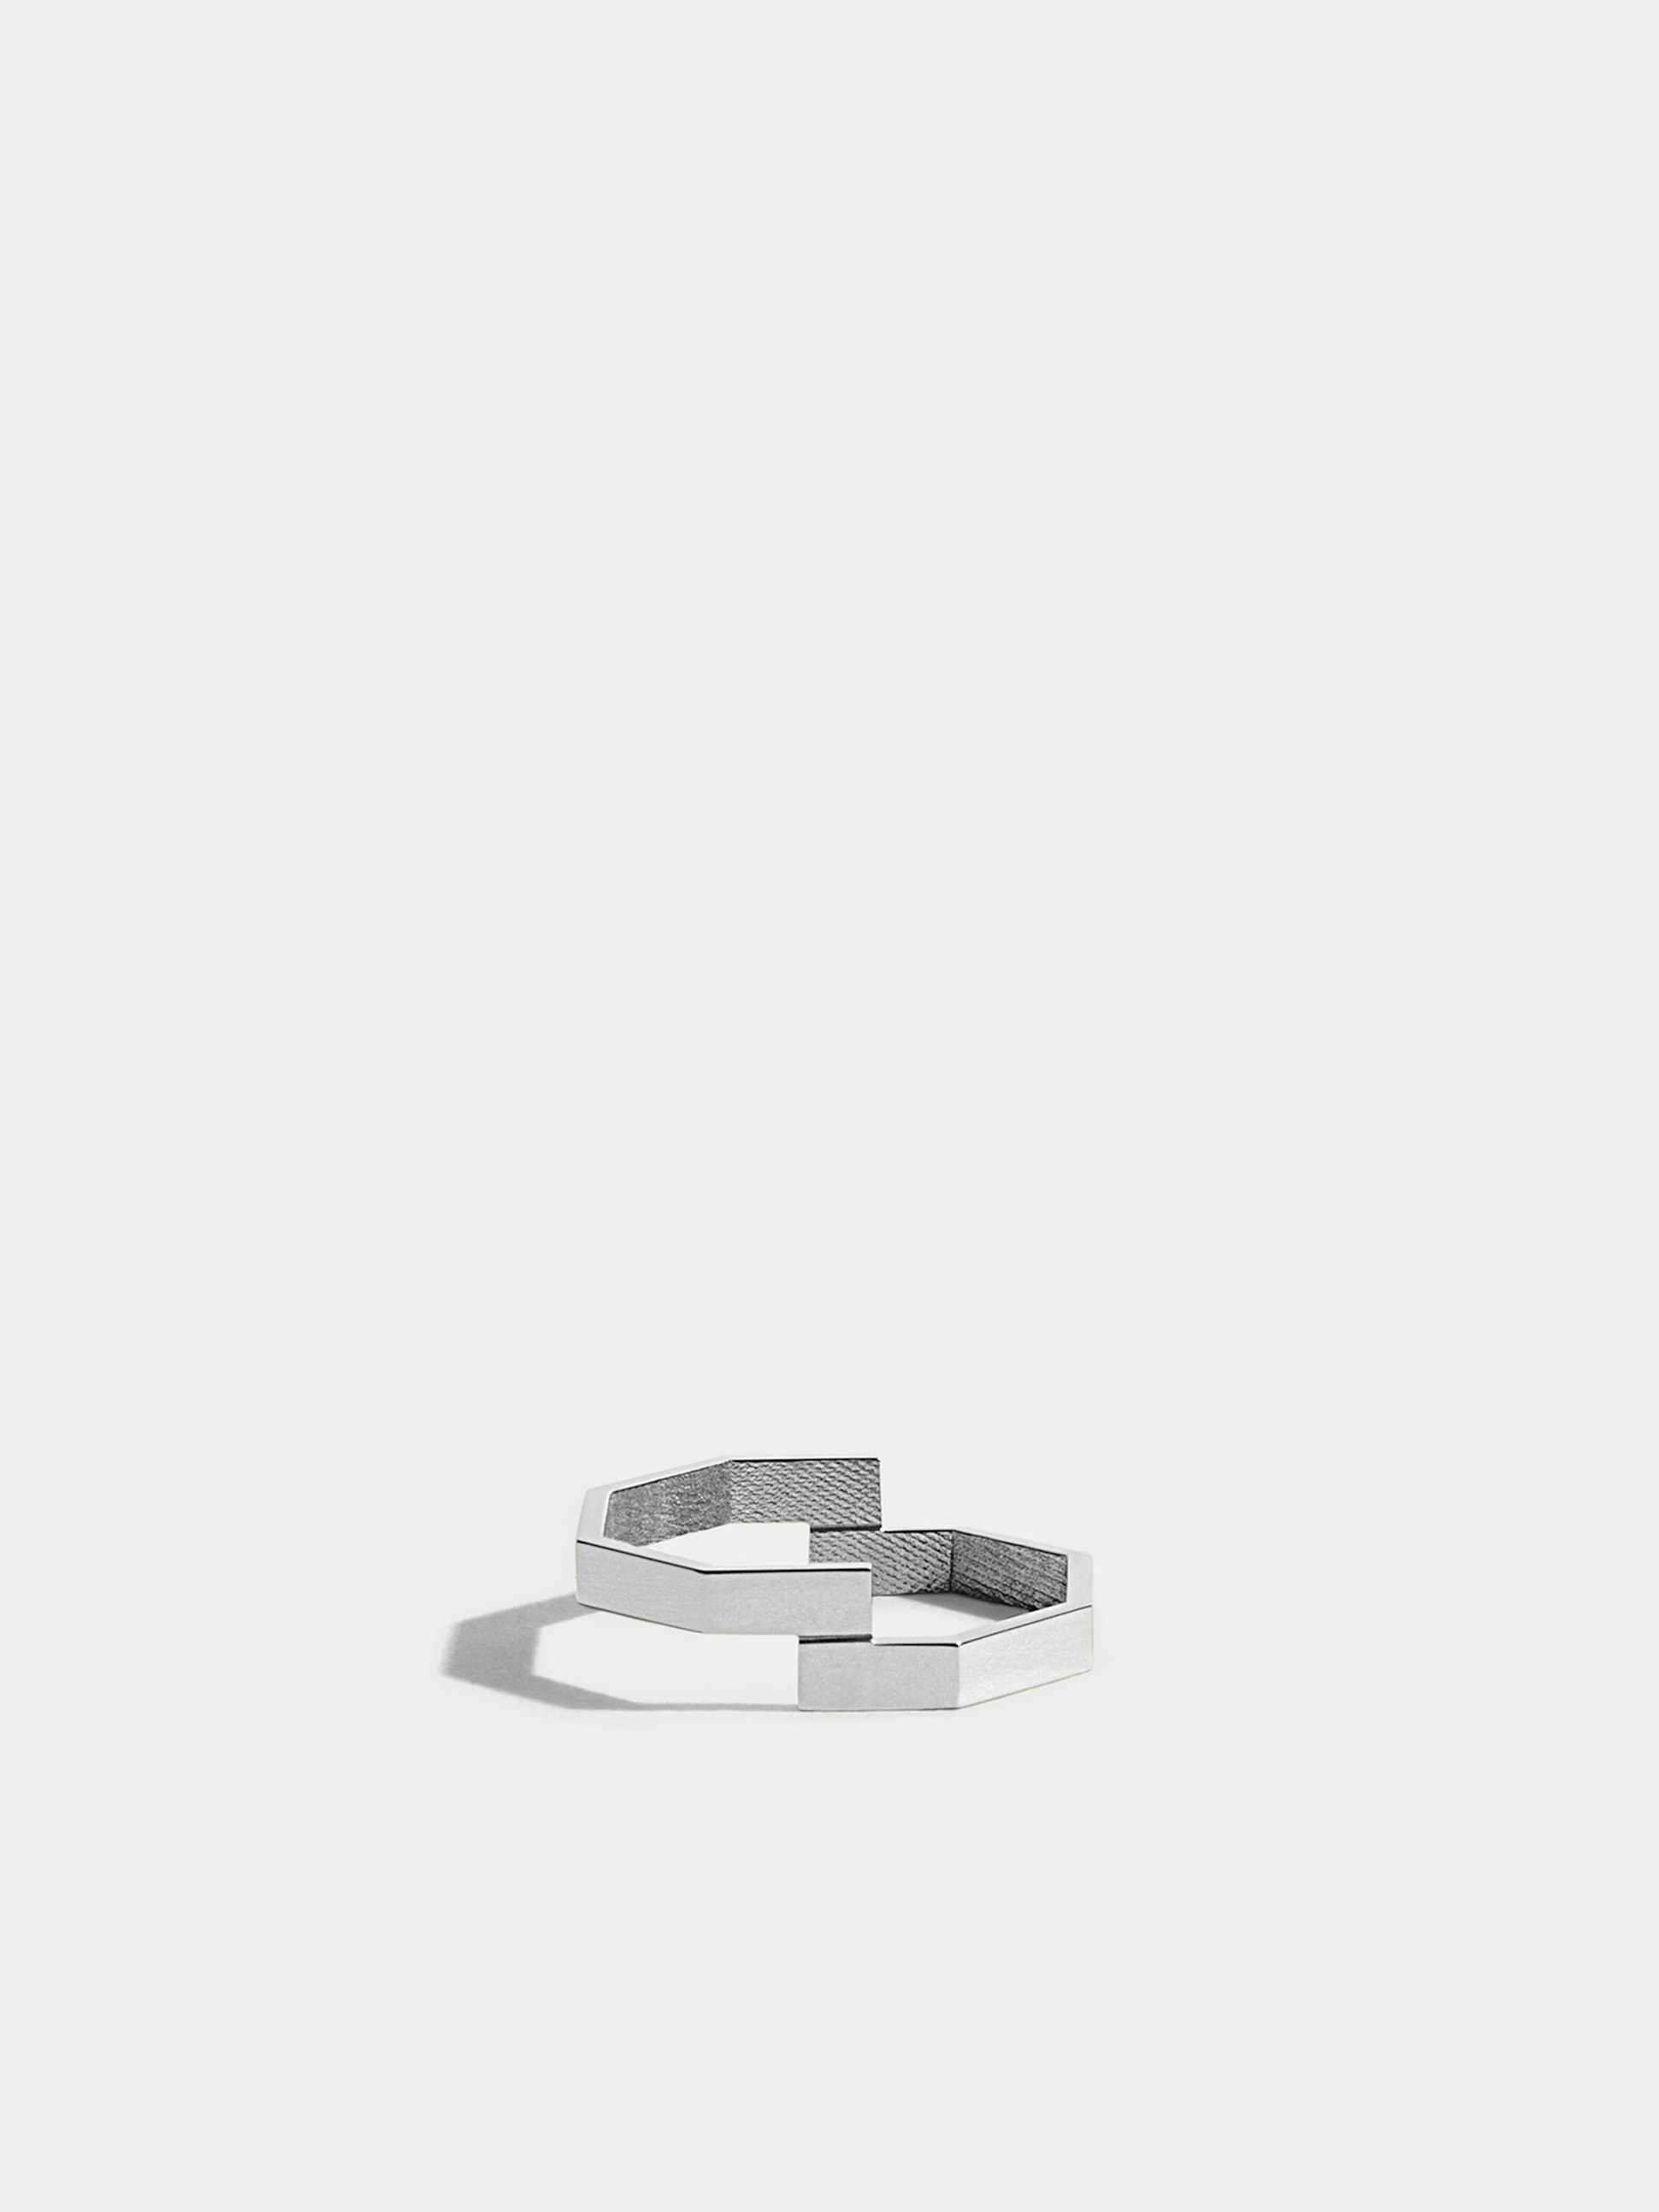 Octogone double ring in 18k Fairmined ethical white gold